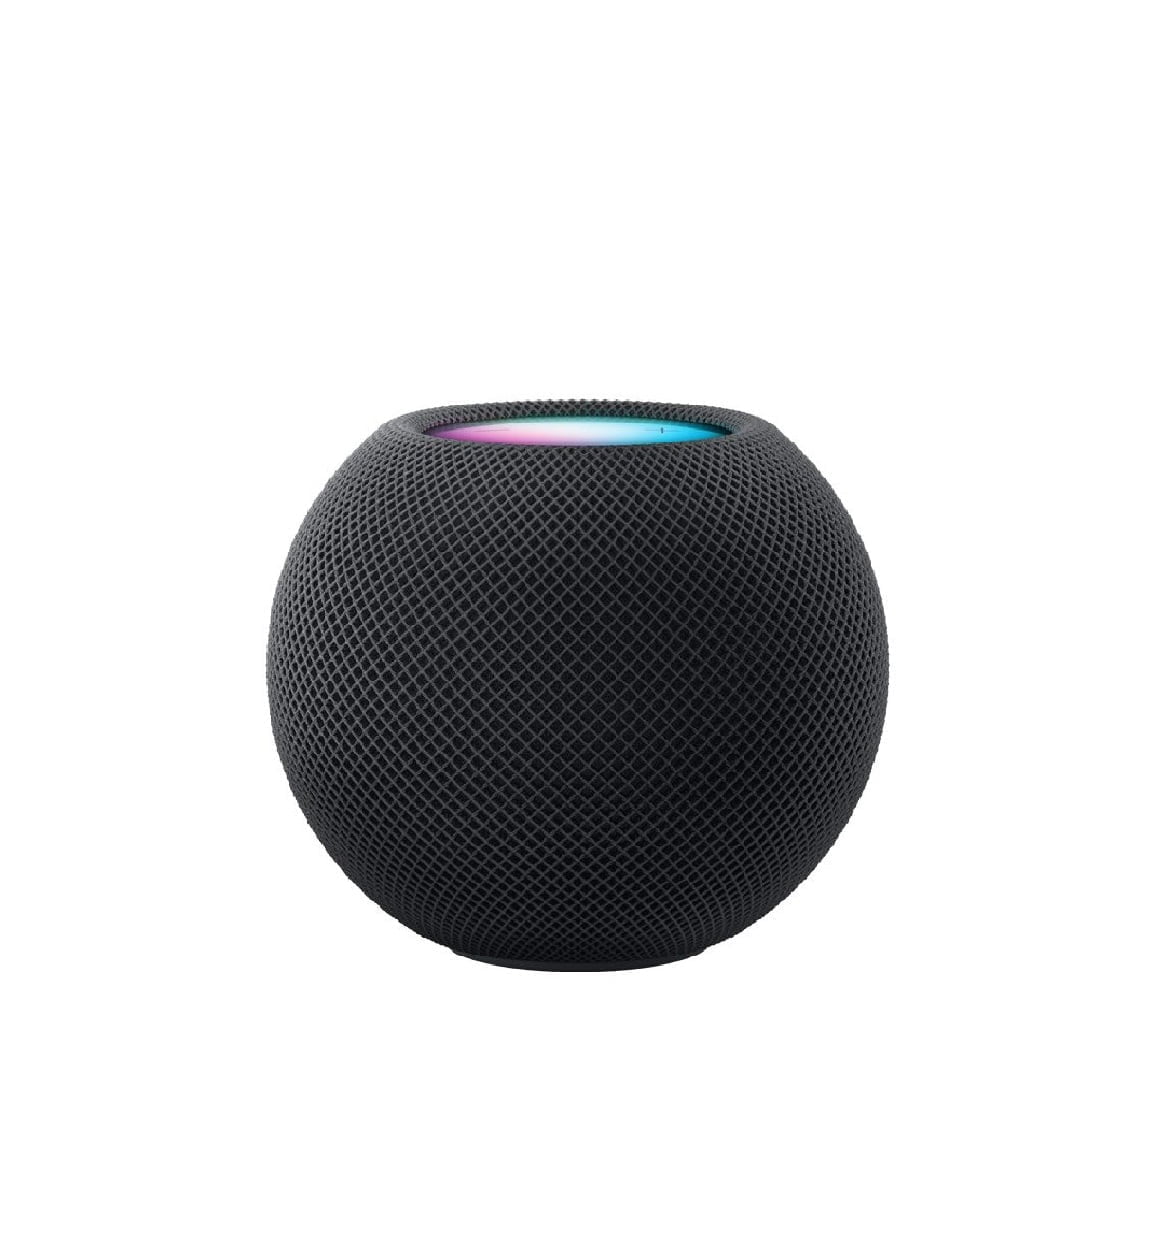 Homepod Mini Select Spacegray 202110 Fv1 Apple &Amp;Lt;H1&Amp;Gt;Apple Homepod Mini Space Gray&Amp;Lt;/H1&Amp;Gt; Jam-Packed With Innovation, Homepod Mini Fills The Entire Room With Rich 360-Degree Audio. Place Multiple Speakers Around The House For A Connected Sound System.² And With Siri, Your Favorite Do-It-All Intelligent Assistant Helps With Everyday Tasks And Controls Your Smart Home Privately And Securely. &Amp;Lt;H2&Amp;Gt;Features:&Amp;Lt;/H2&Amp;Gt; - Fills The Entire Room With Rich 360-Degree Audio - Siri Is Your Do-It-All Intelligent Assistant, Helping With Everyday Tasks - Easily Control Your Smart Home - Designed To Keep Your Data Private And Secure - Place Multiple Homepod Mini Speakers Around The House For A Connected Sound System² - Intercom Messages To Every Room³ - Pair Two Homepod Mini Speakers Together For Immersive Stereo Sound - Voice Recognition Gives Each Family Member A Personalized Experience⁴ - Seamlessly Hand-Off Audio By Bringing Your Iphone Close To Homepod Setup Requires Wi-Fi And Iphone, Ipad, Or Ipod Touch With The Latest Software. &Amp;Lt;Pre&Amp;Gt;Apple Warranty&Amp;Lt;/Pre&Amp;Gt; Homepod Mini Apple Homepod Mini Space Gray